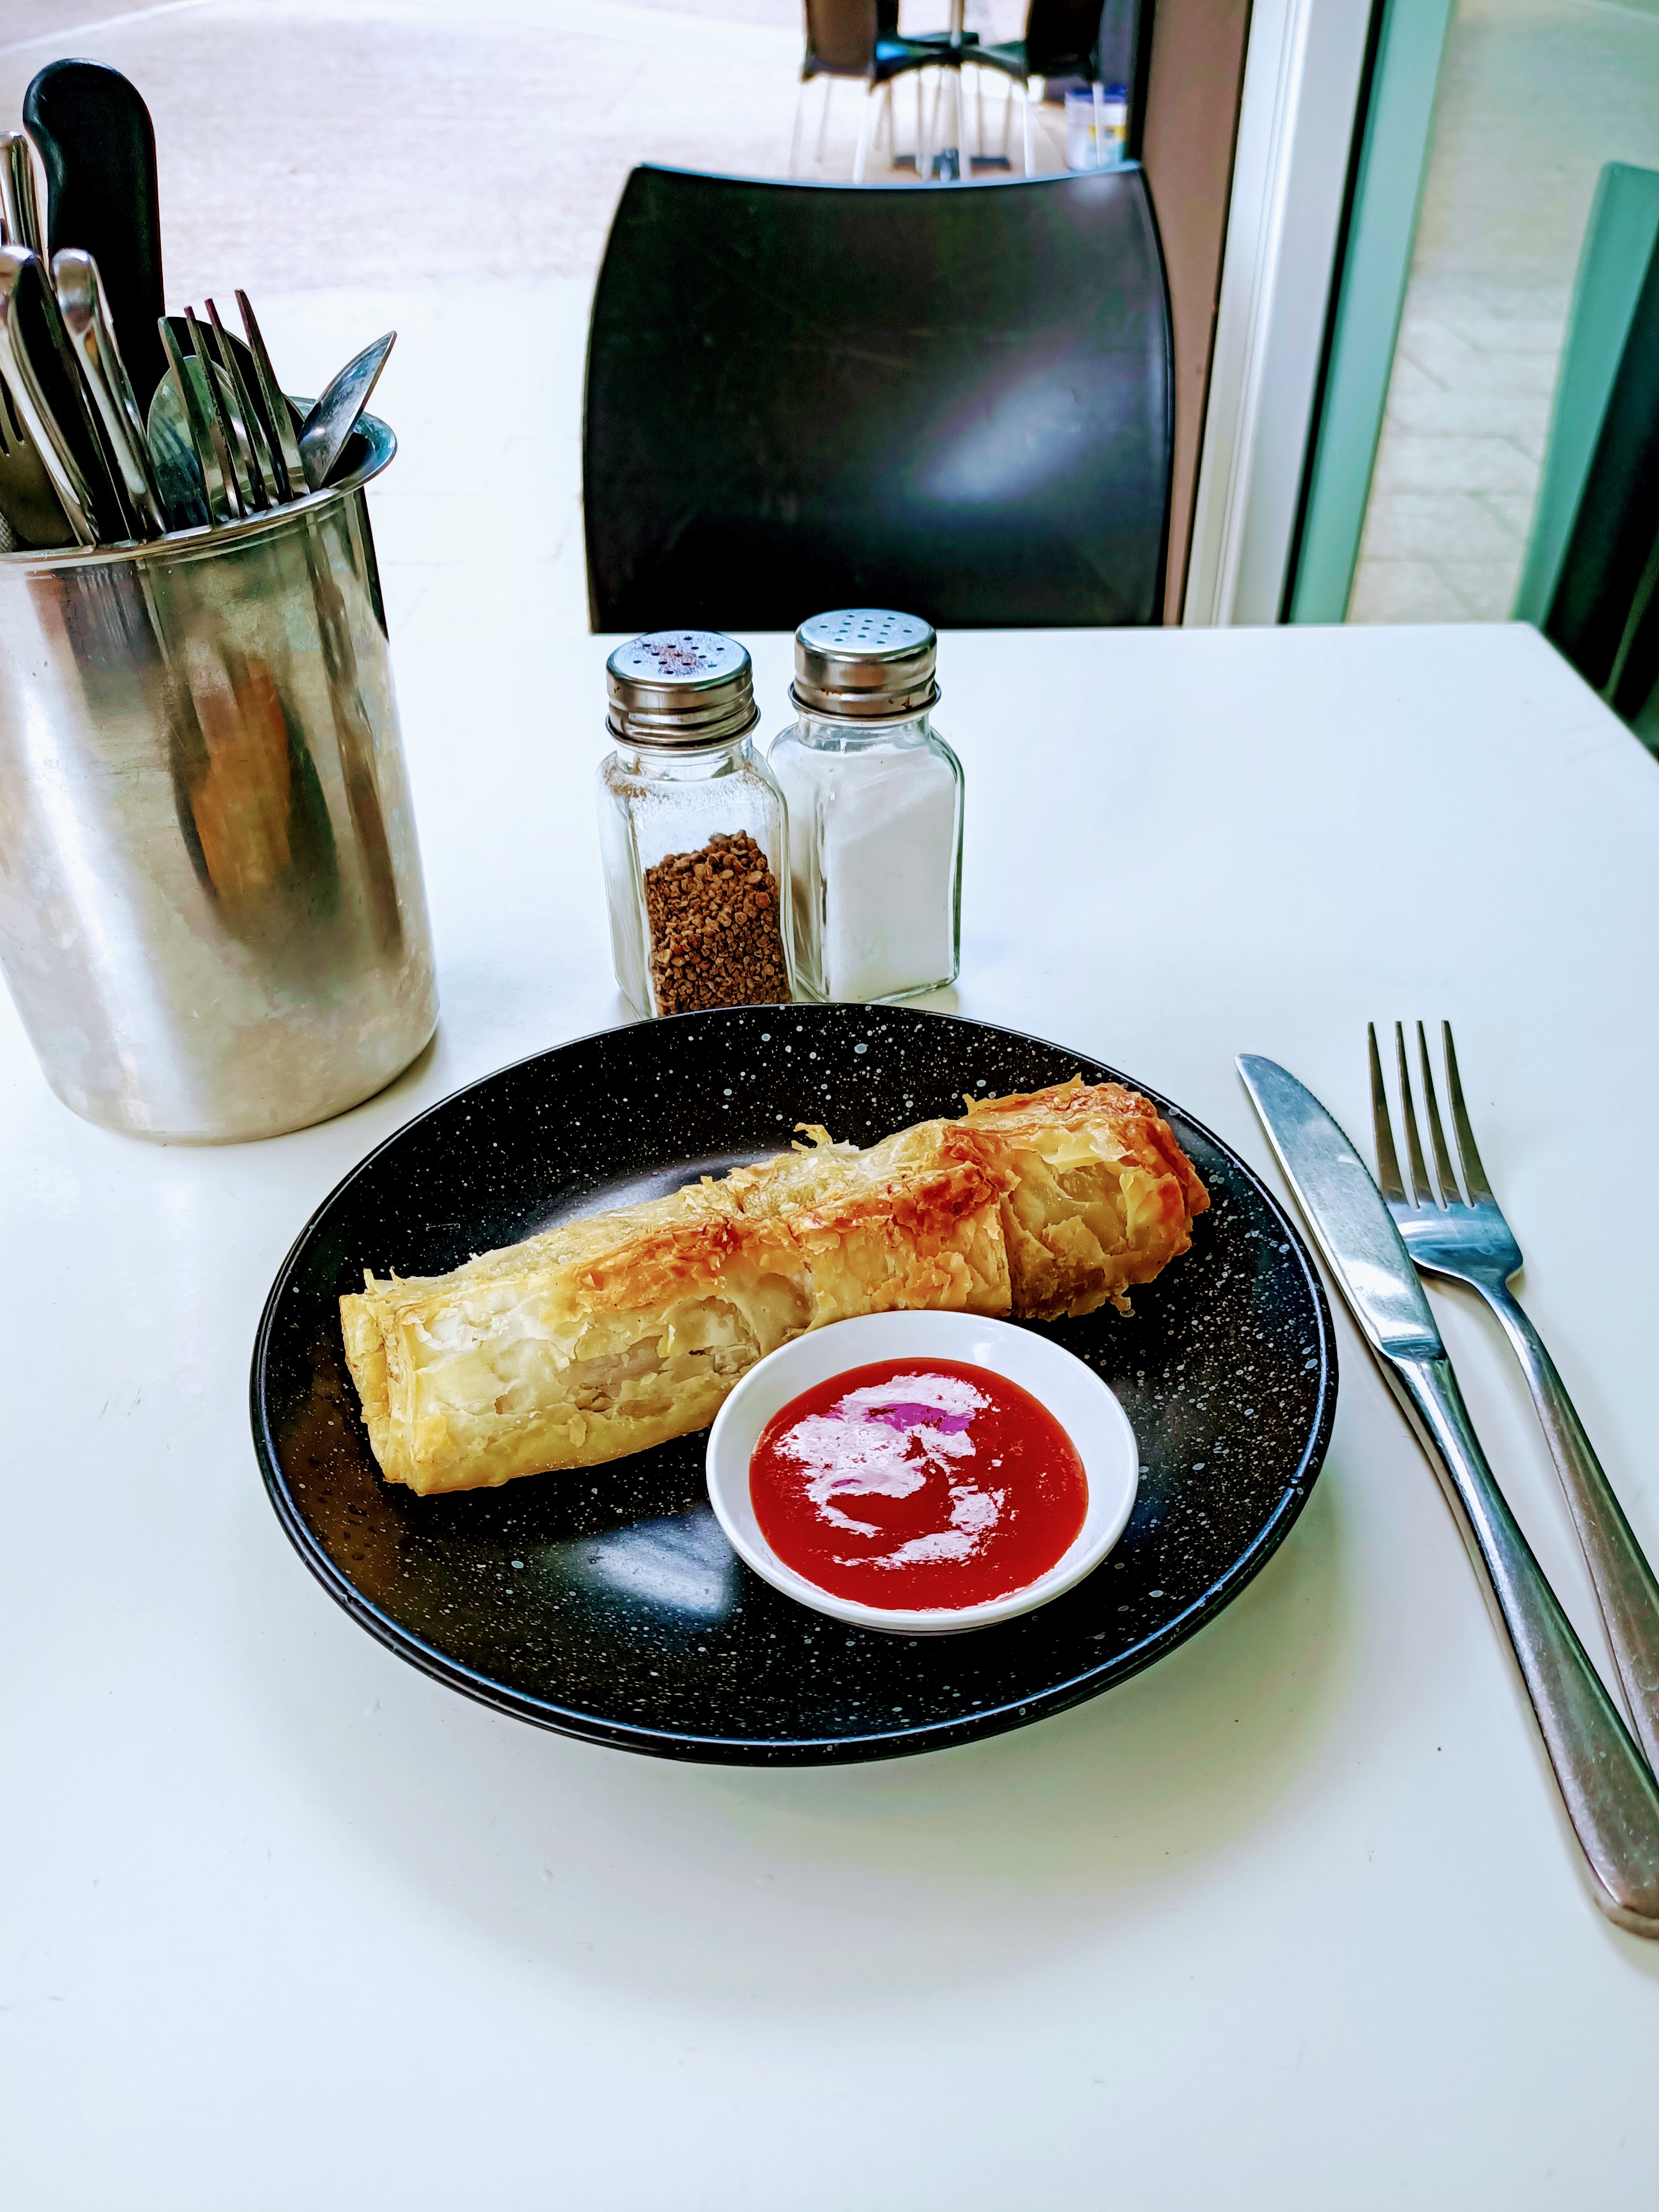 South African sausage roll at Merle's